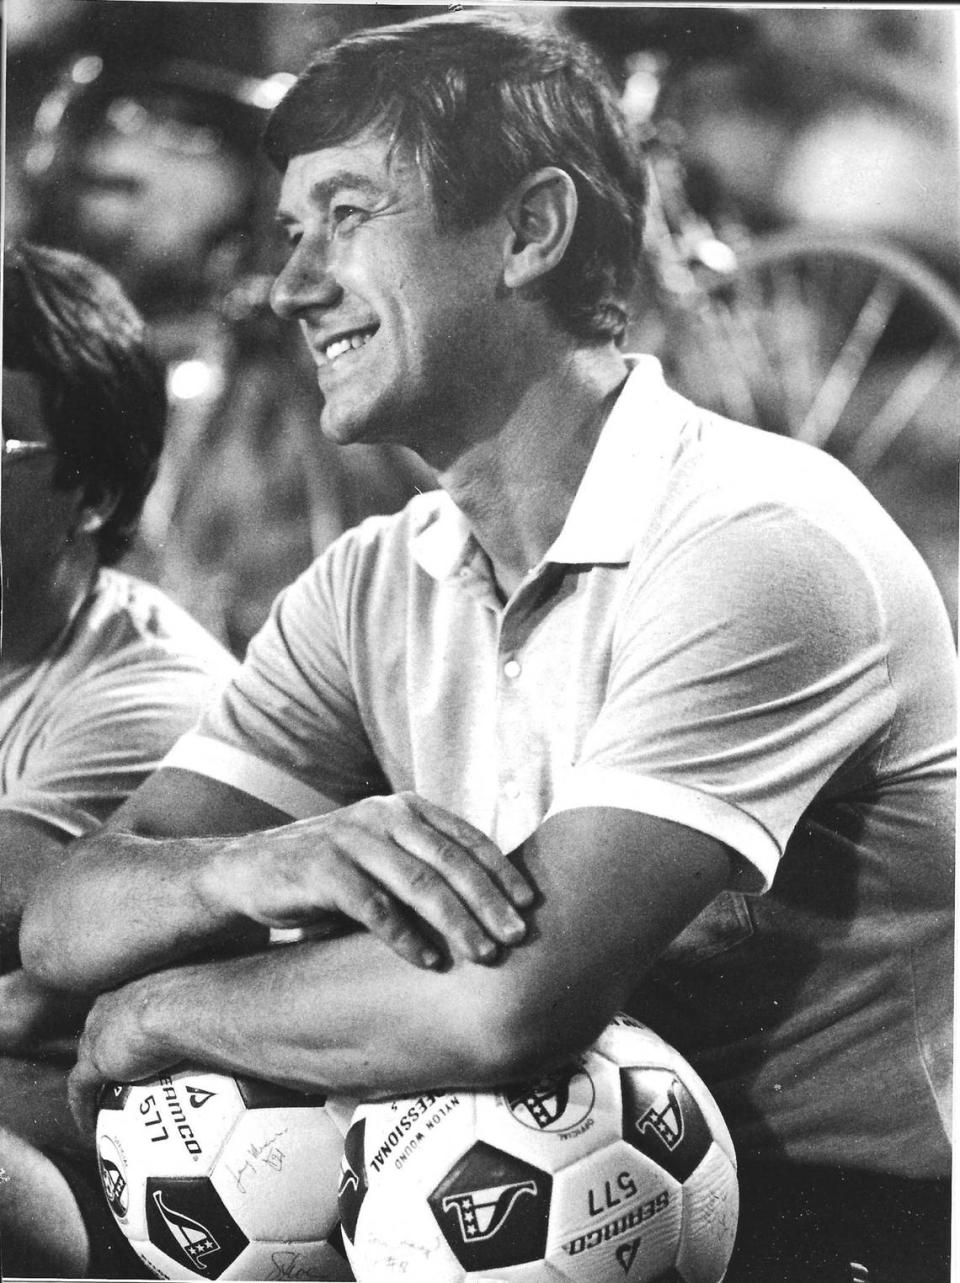 Bob Benson was the owner of Charlotte’s Carolina Lightnin’ minor-league soccer team from 1981-83, at a time before Charlotte had an NBA or NFL franchise.